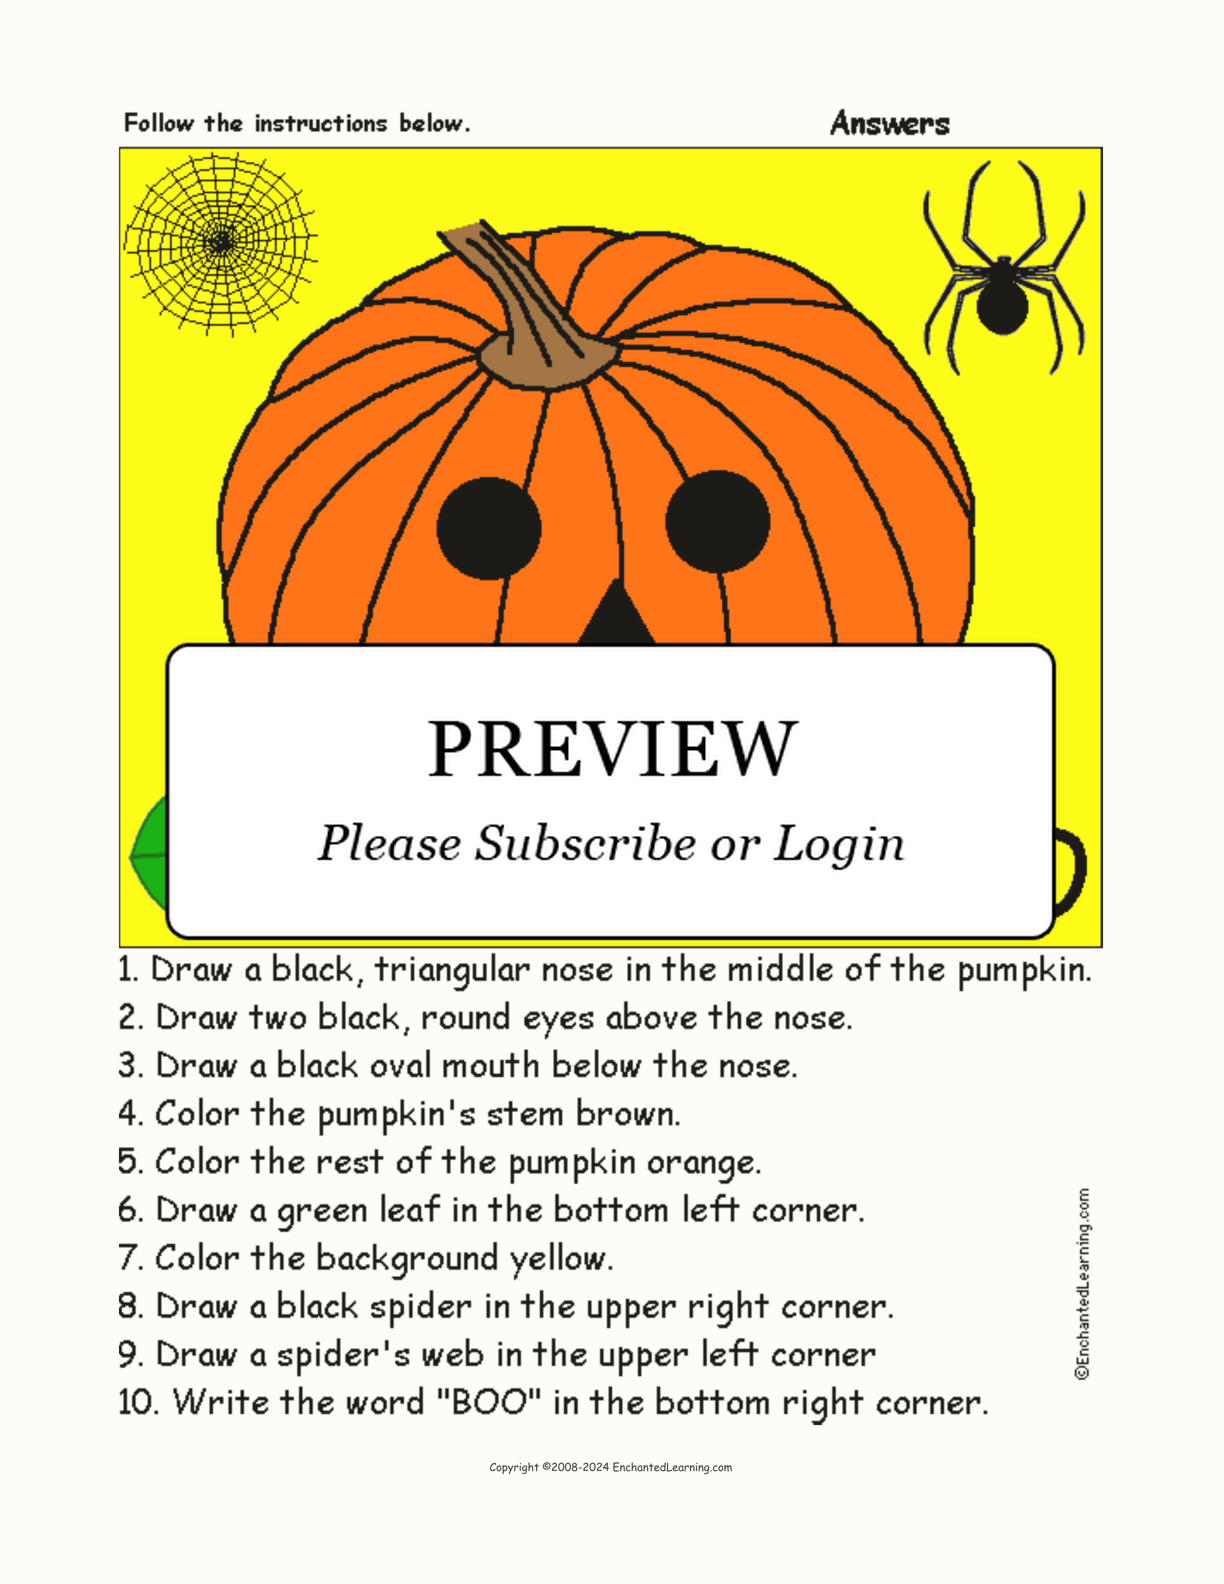 Jack-o'-Lantern Follow the Instructions interactive worksheet page 2